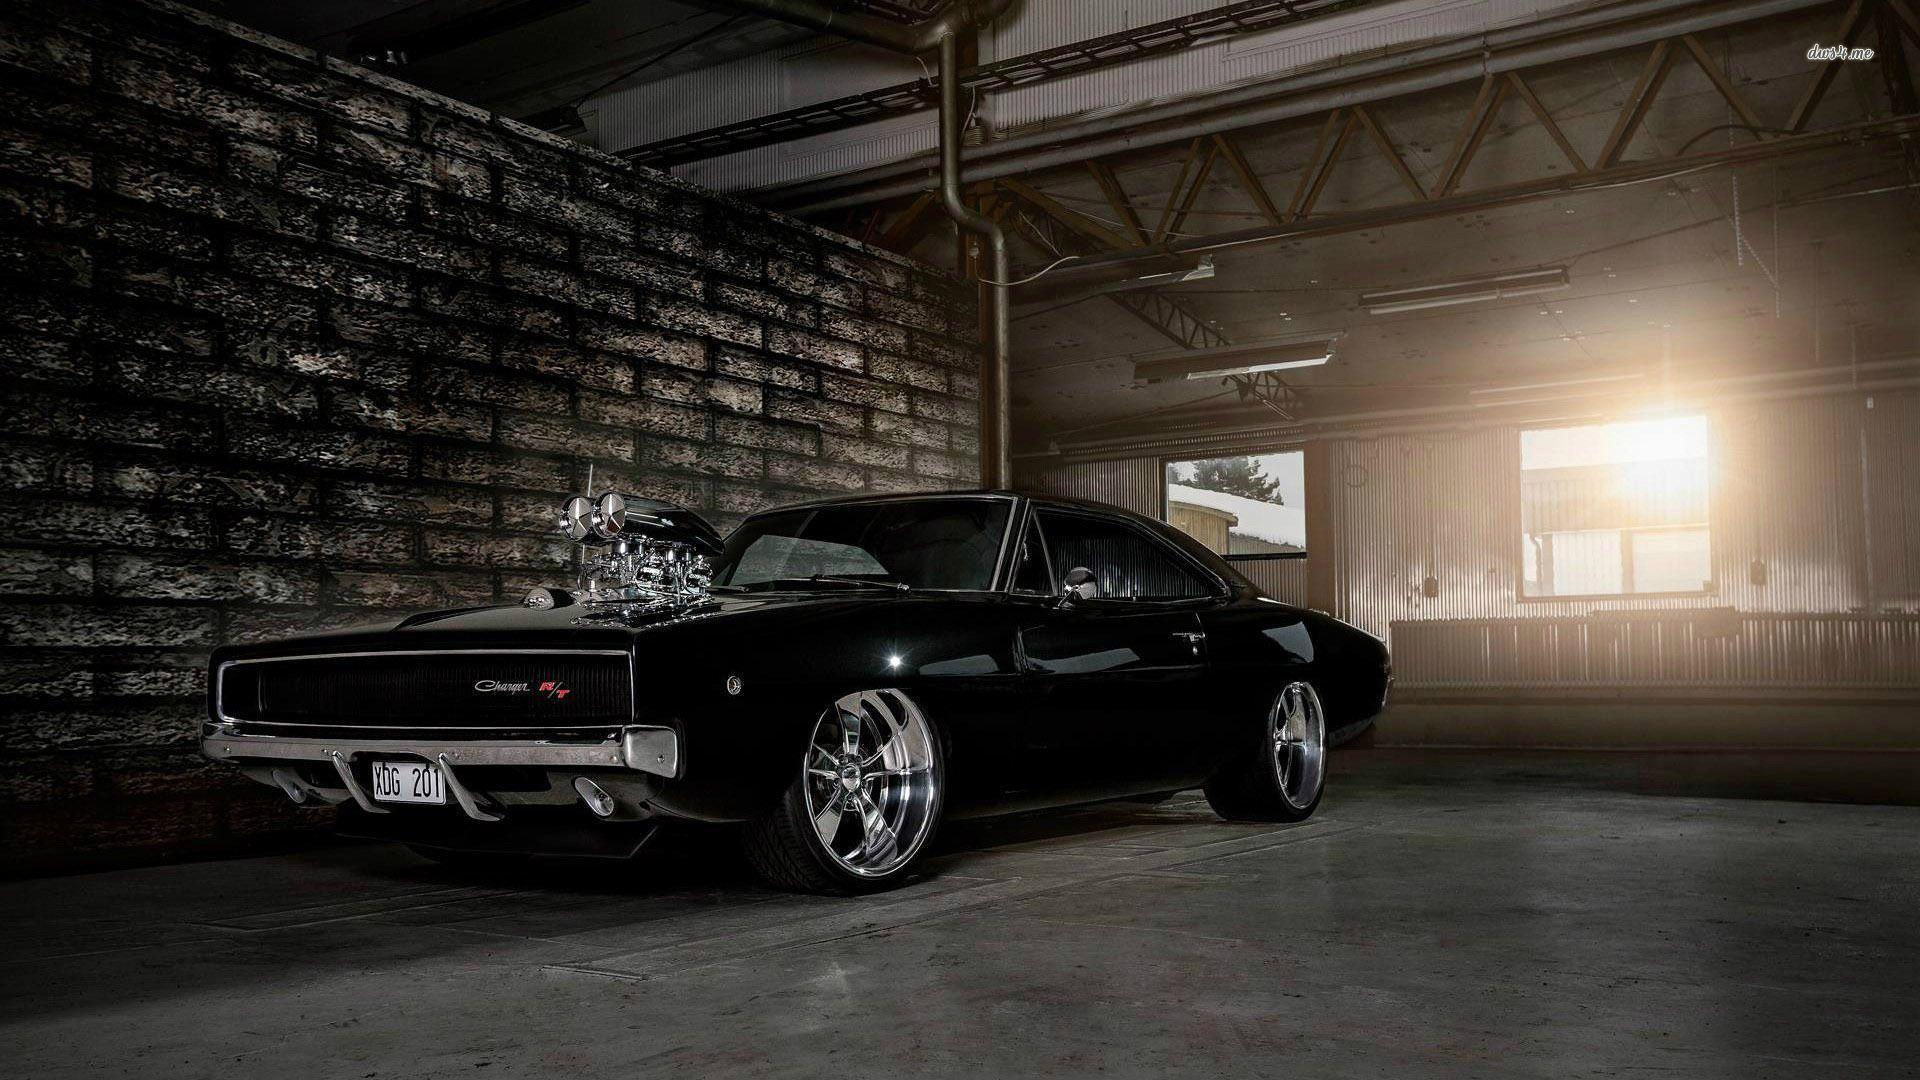 Charger Wallpaper. Dodge Charger Tron Legacy Wallpaper, Charger Wallpaper and Turbocharger Wallpaper